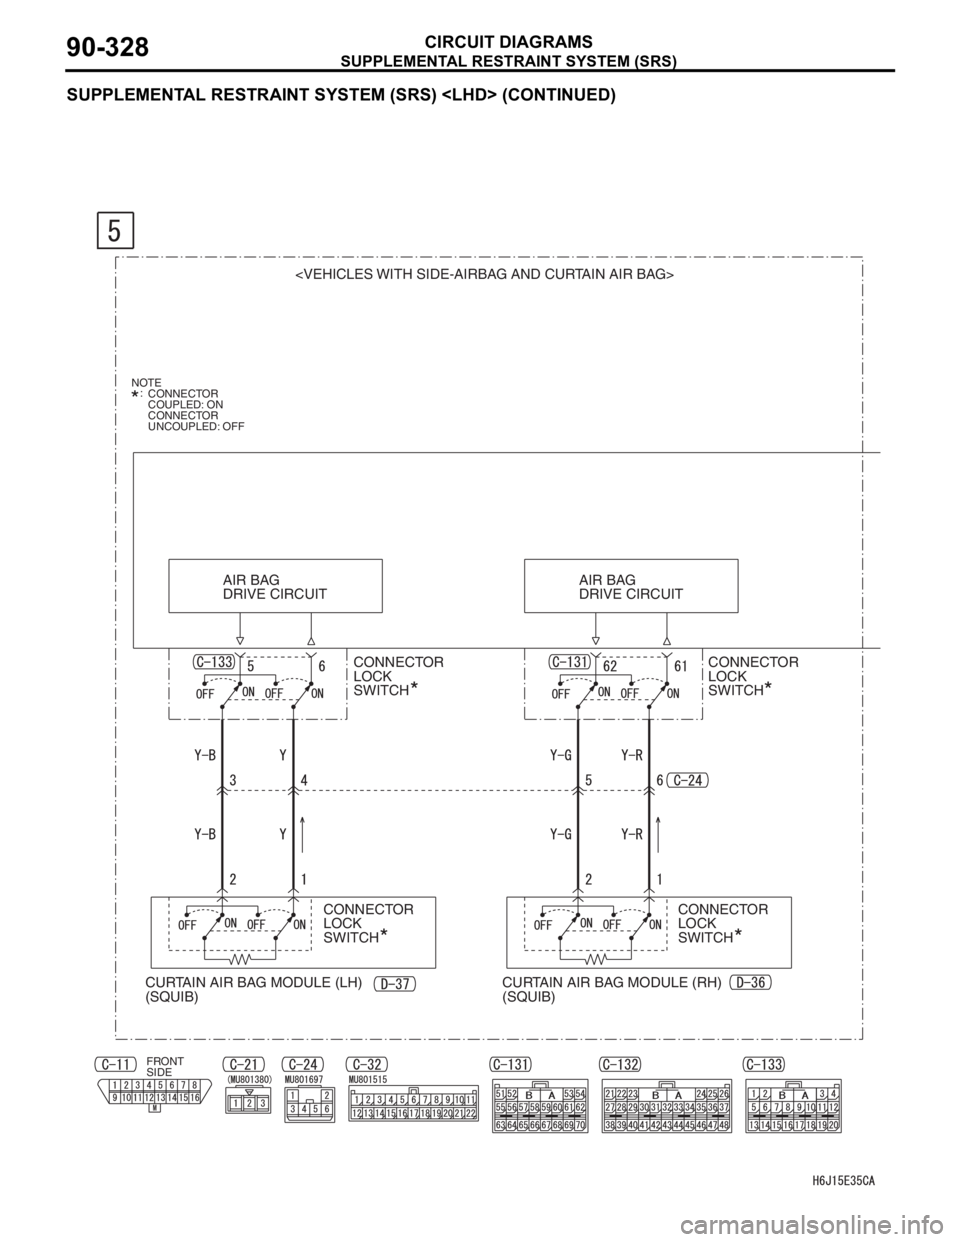 MITSUBISHI LANCER 2006  Workshop Manual SUPPLEMENTAL RESTRAINT SYSTEM (SRS)
CIRCUIT DIAGRAMS90-328
SUPPLEMENTAL RESTRAINT SYSTEM (SRS) <LHD> (CONTINUED)
<VEHICLES WITH SIDE-AIRBAG AND CURTAIN AIR BAG>
CONNECTOR 
LOCK 
SWITCH AIR BAG 
DRIVE 